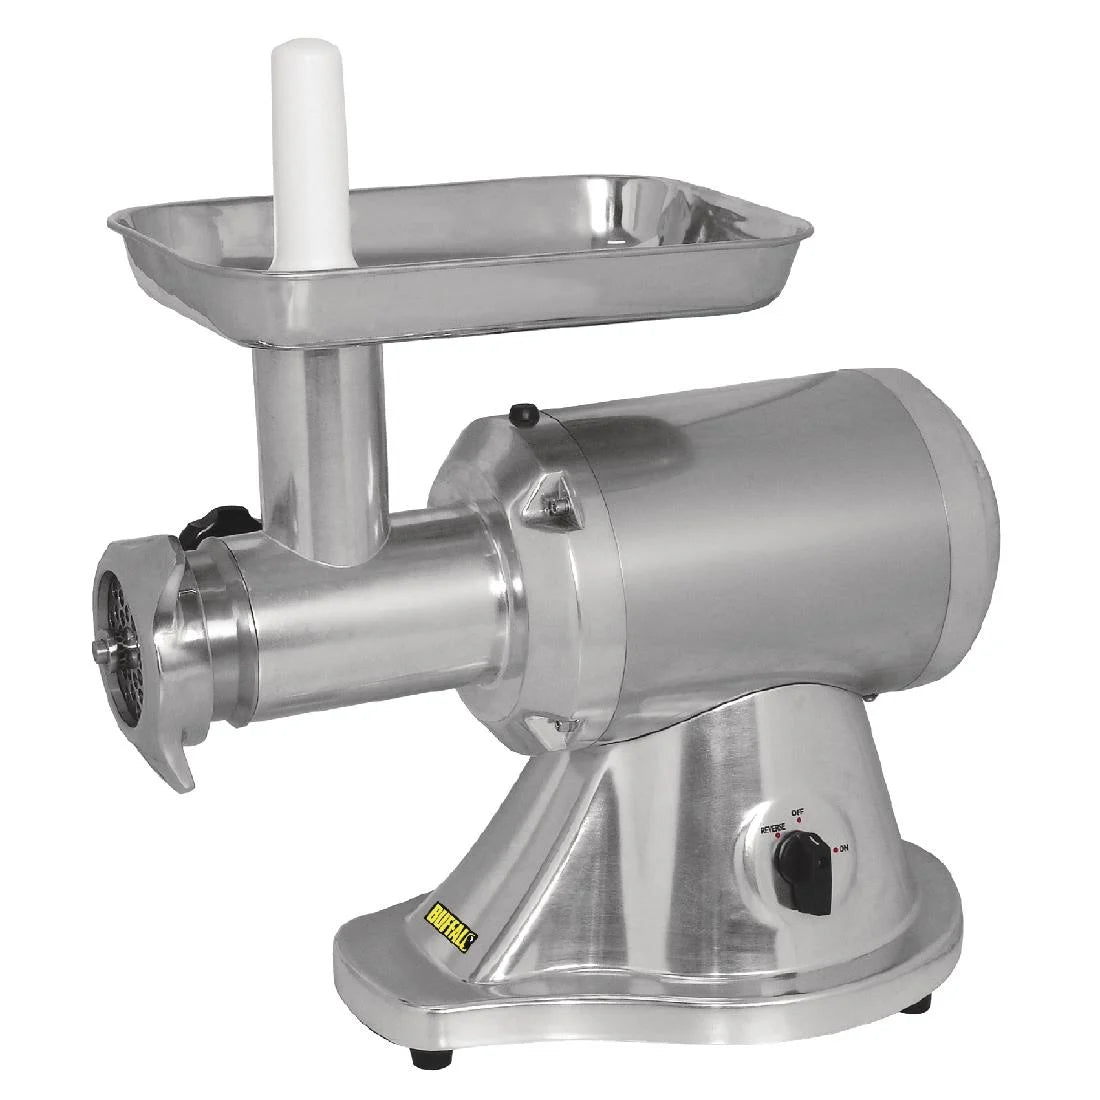 Buffalo Heavy Duty Meat Mincer 800W Motor 250kg An Hour.Product Ref:00847.Model:CD400 -🚚 1-3 Days Delivery